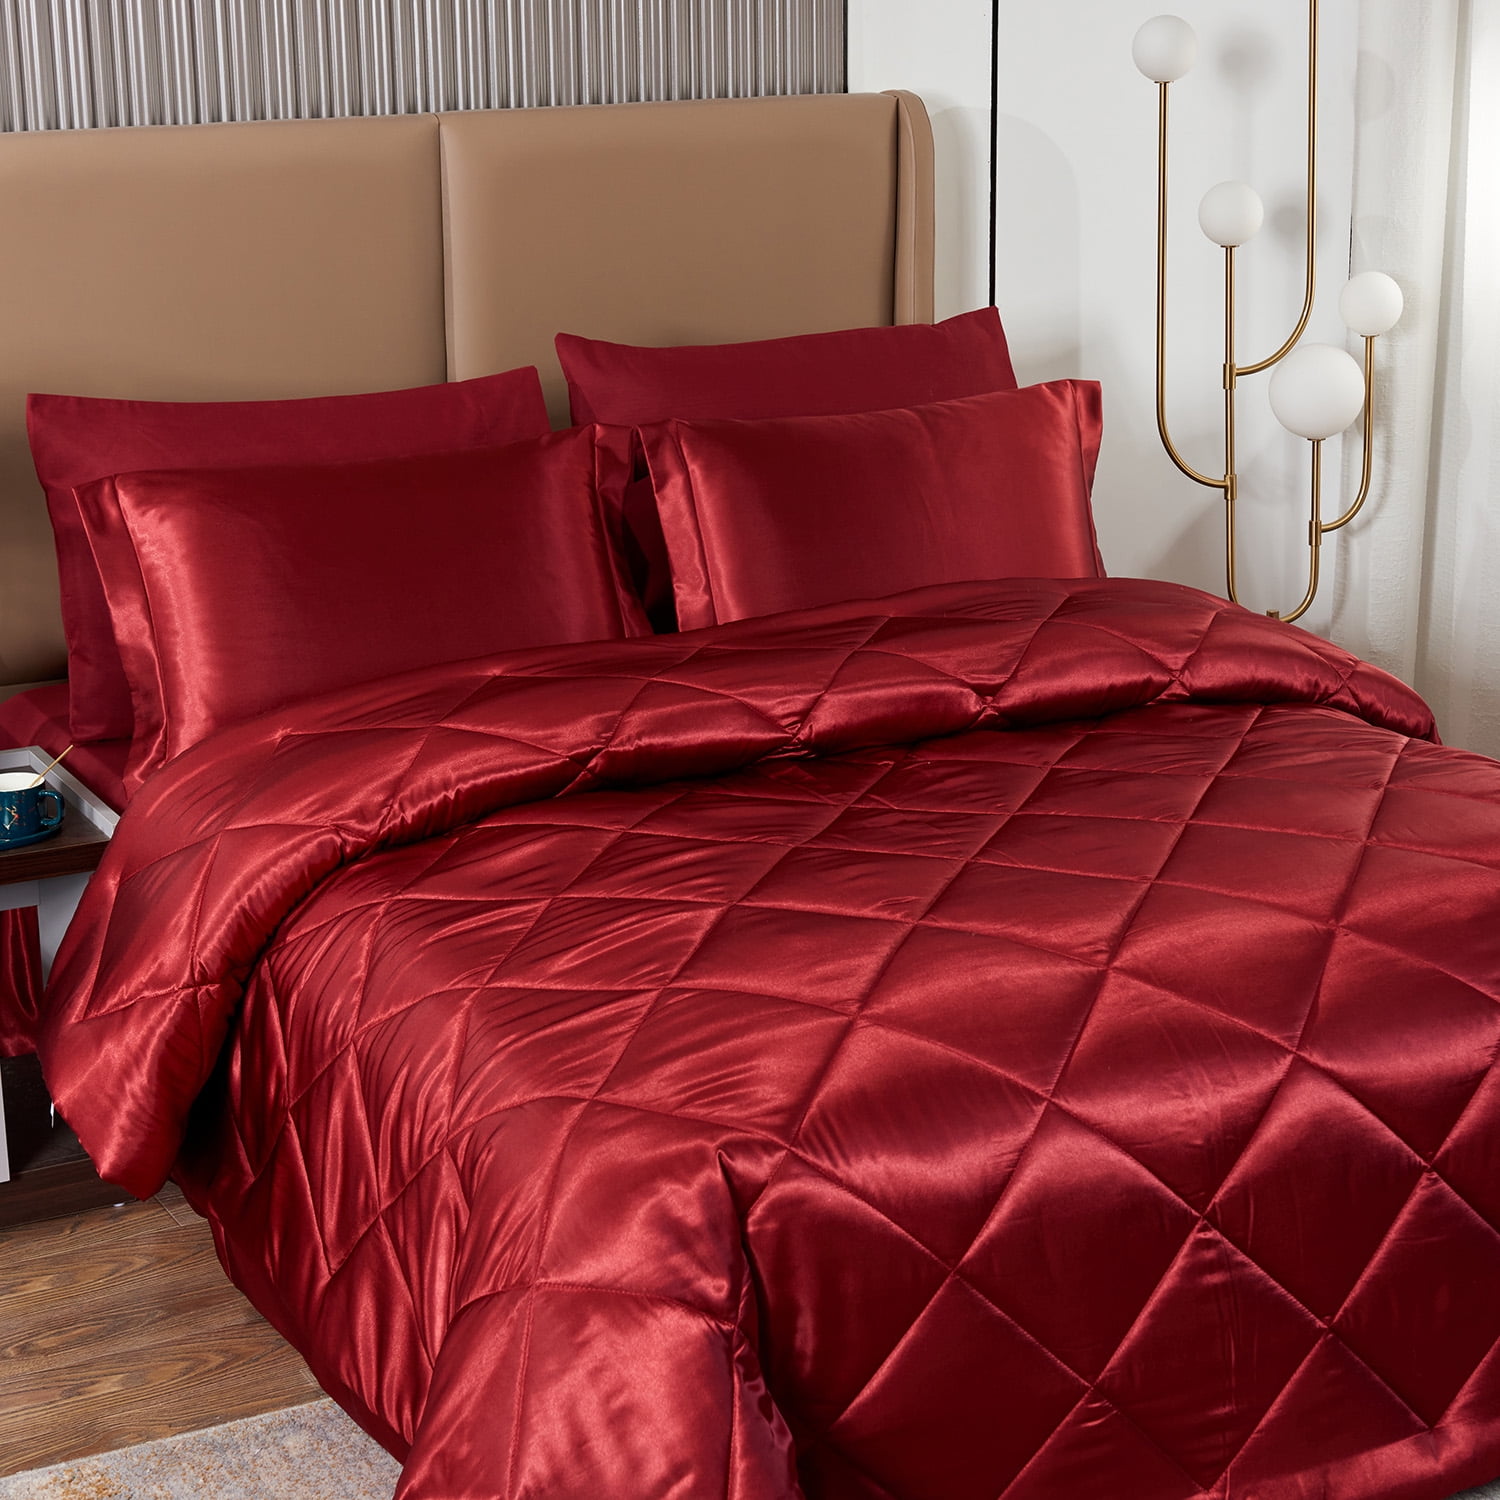 New 8 Piece Red Full Size Comforter Set Bedspread Bed in a Bag Bedding Sheets 